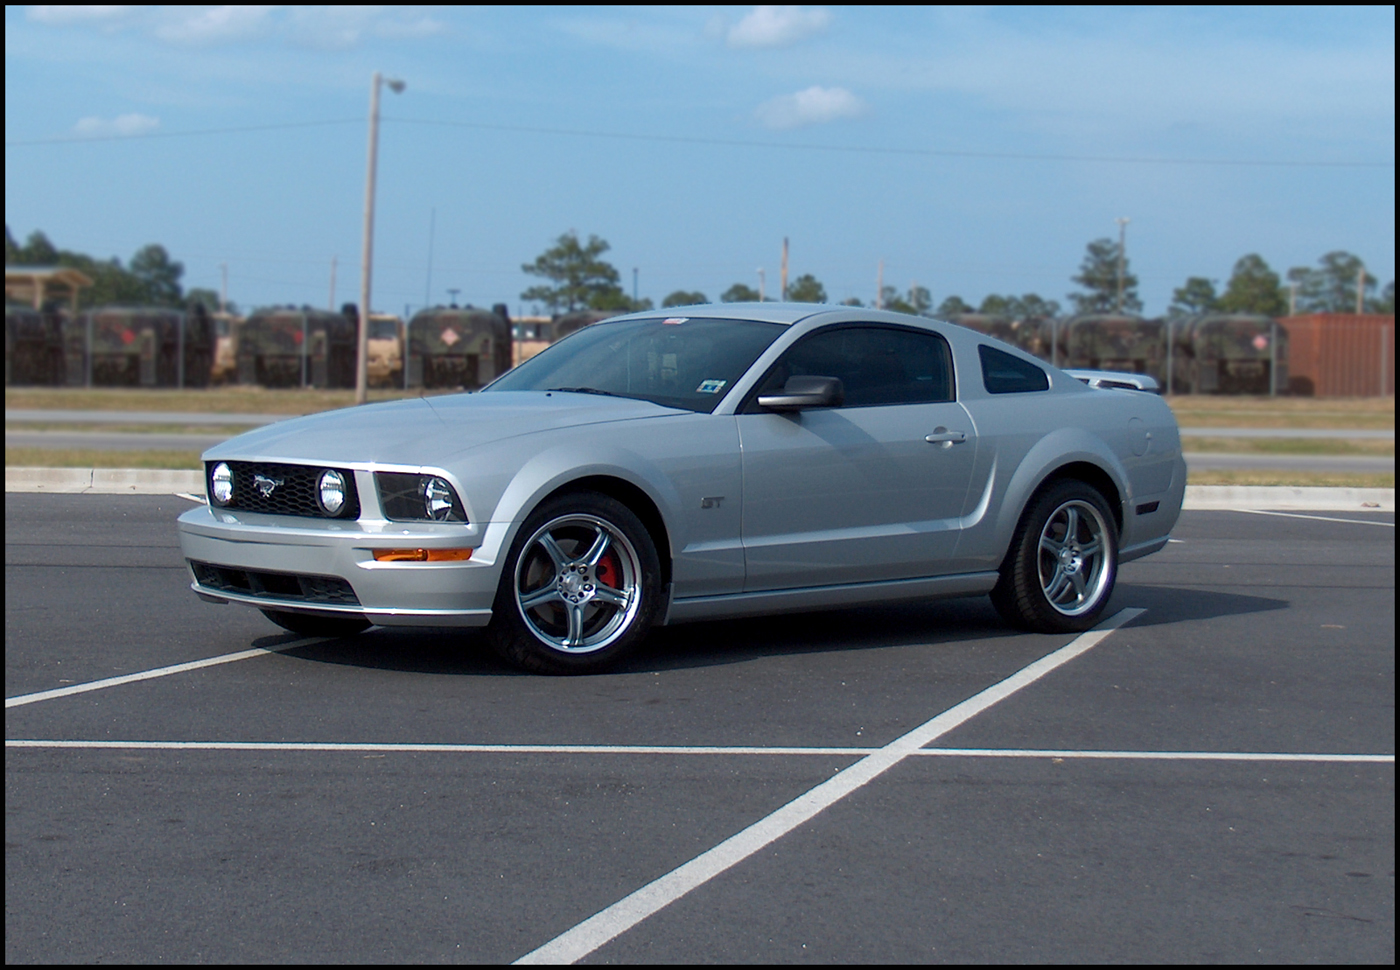 2005 Ford mustang 0-60 #1